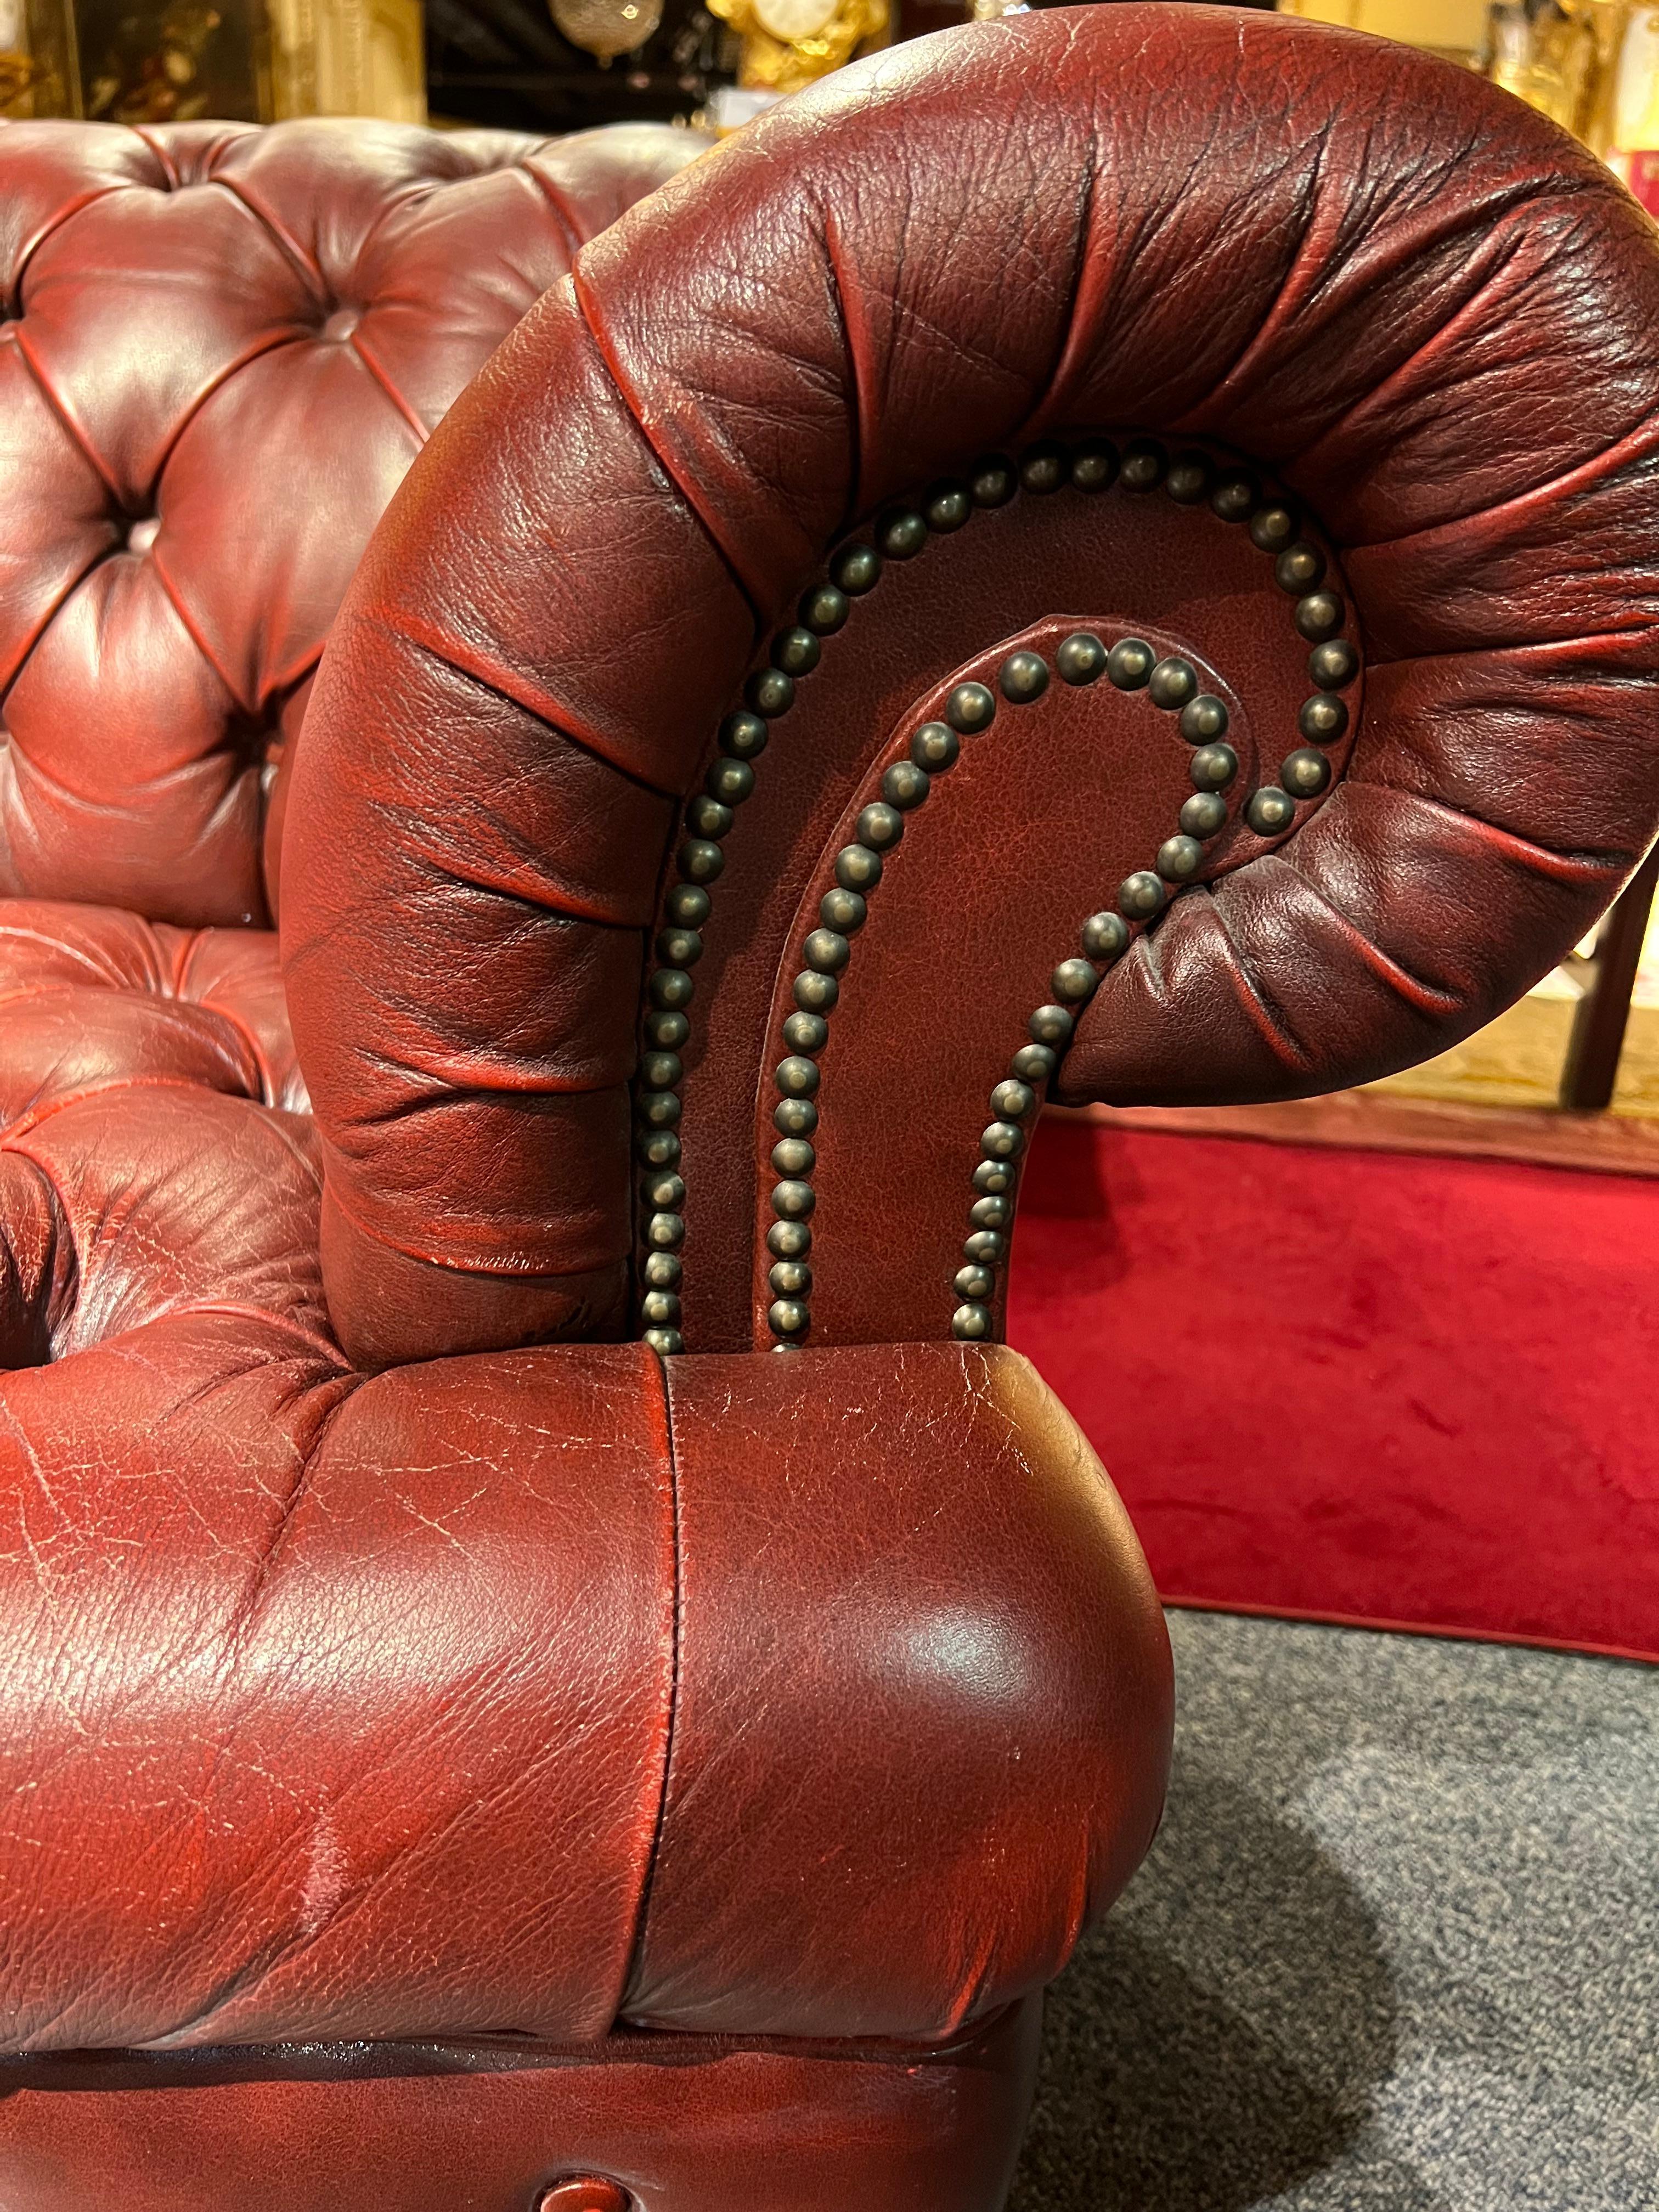 red leather sofas